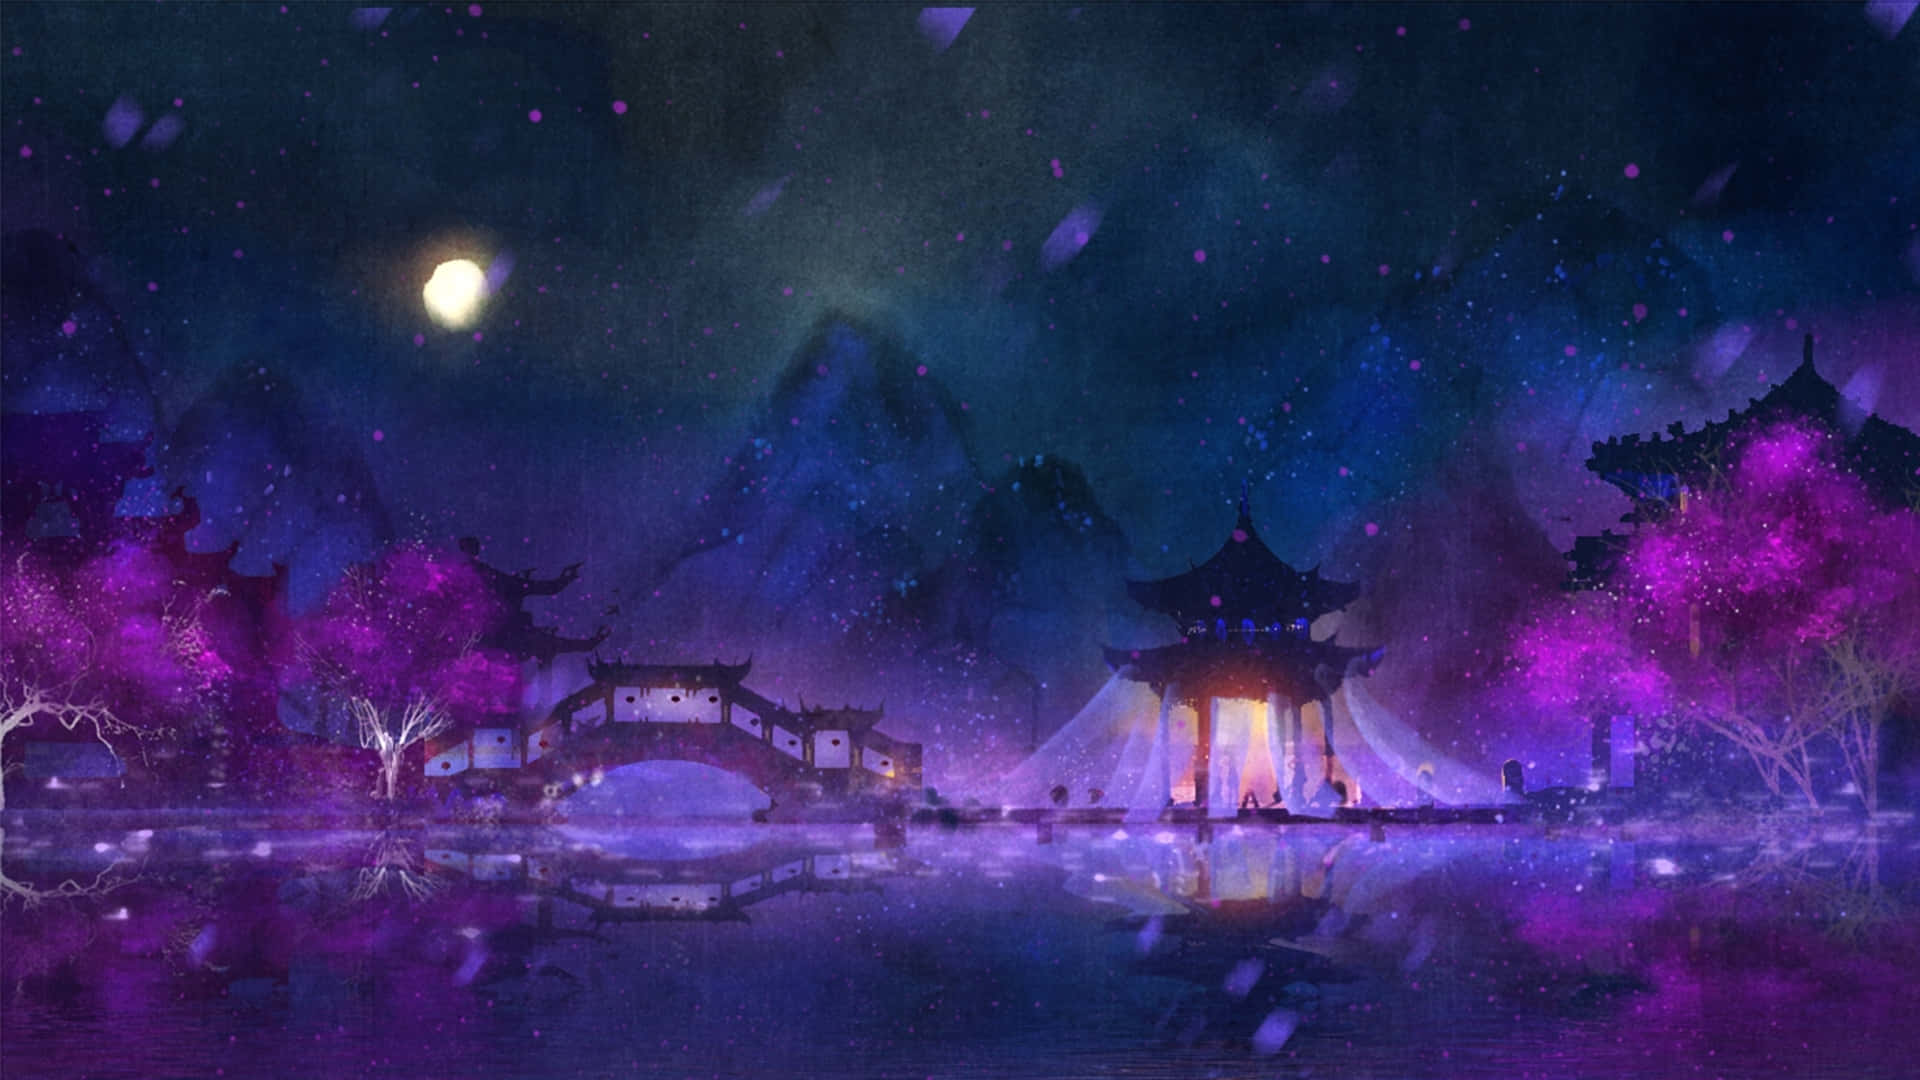 "Fairytale Fantasy: A magnificent purple anime background"